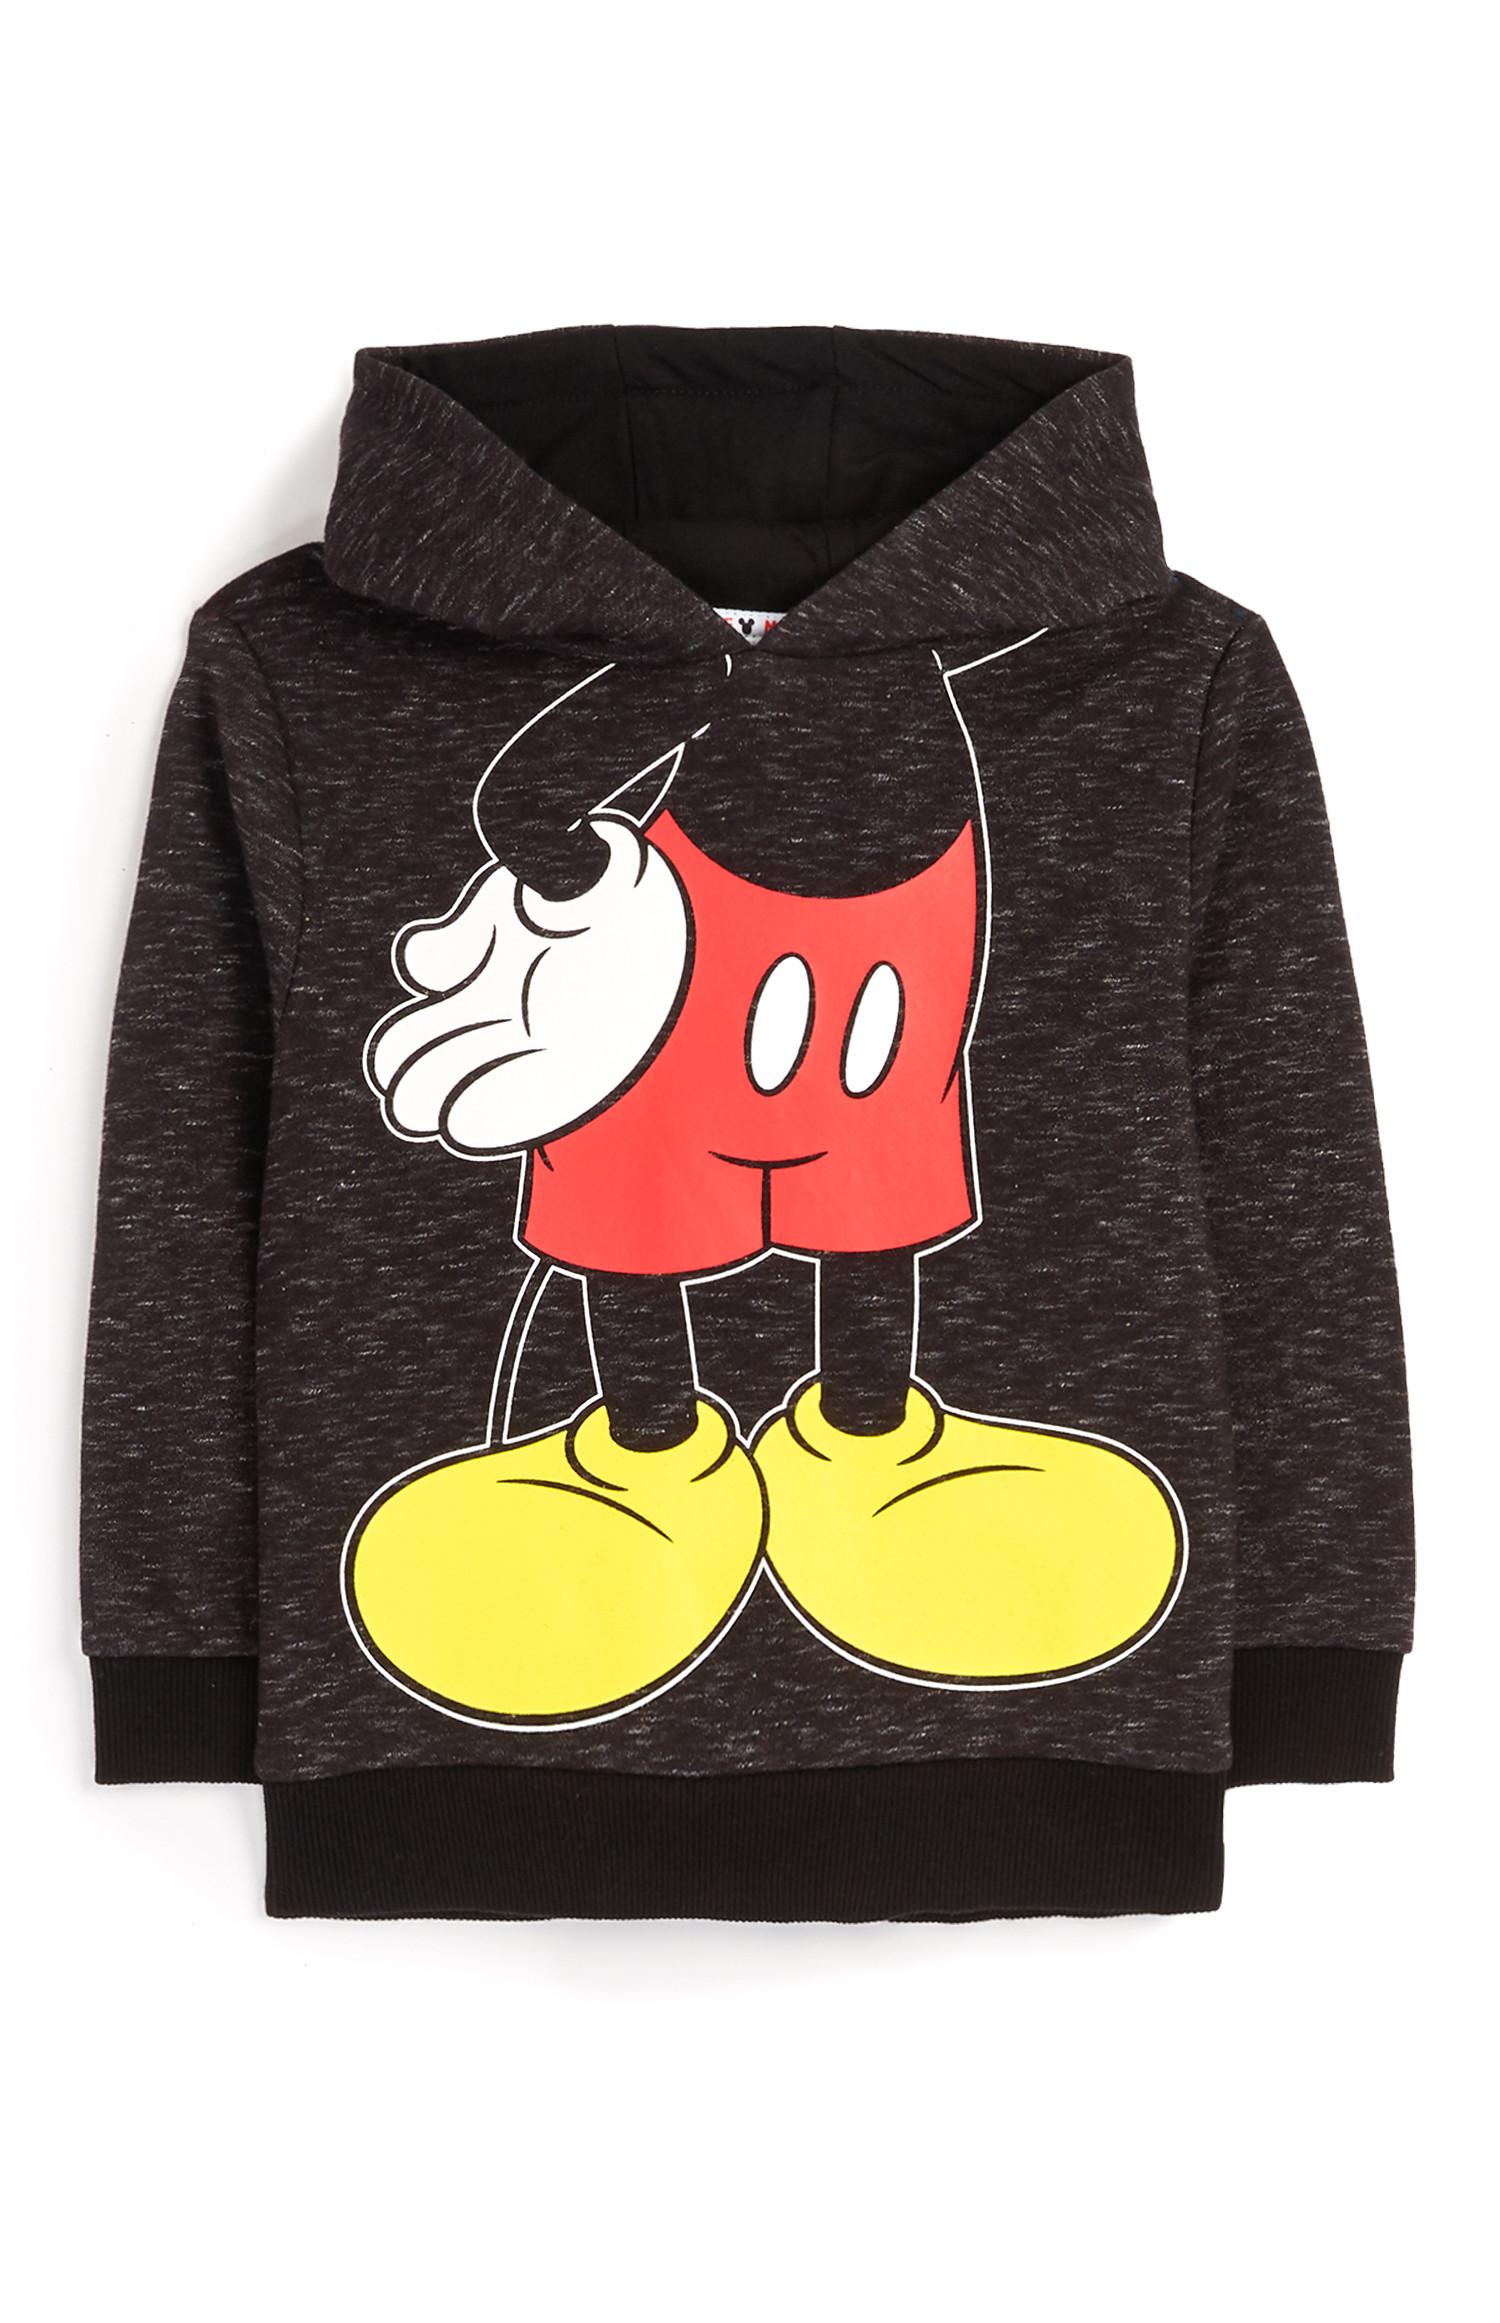 mickey mouse jumper primark